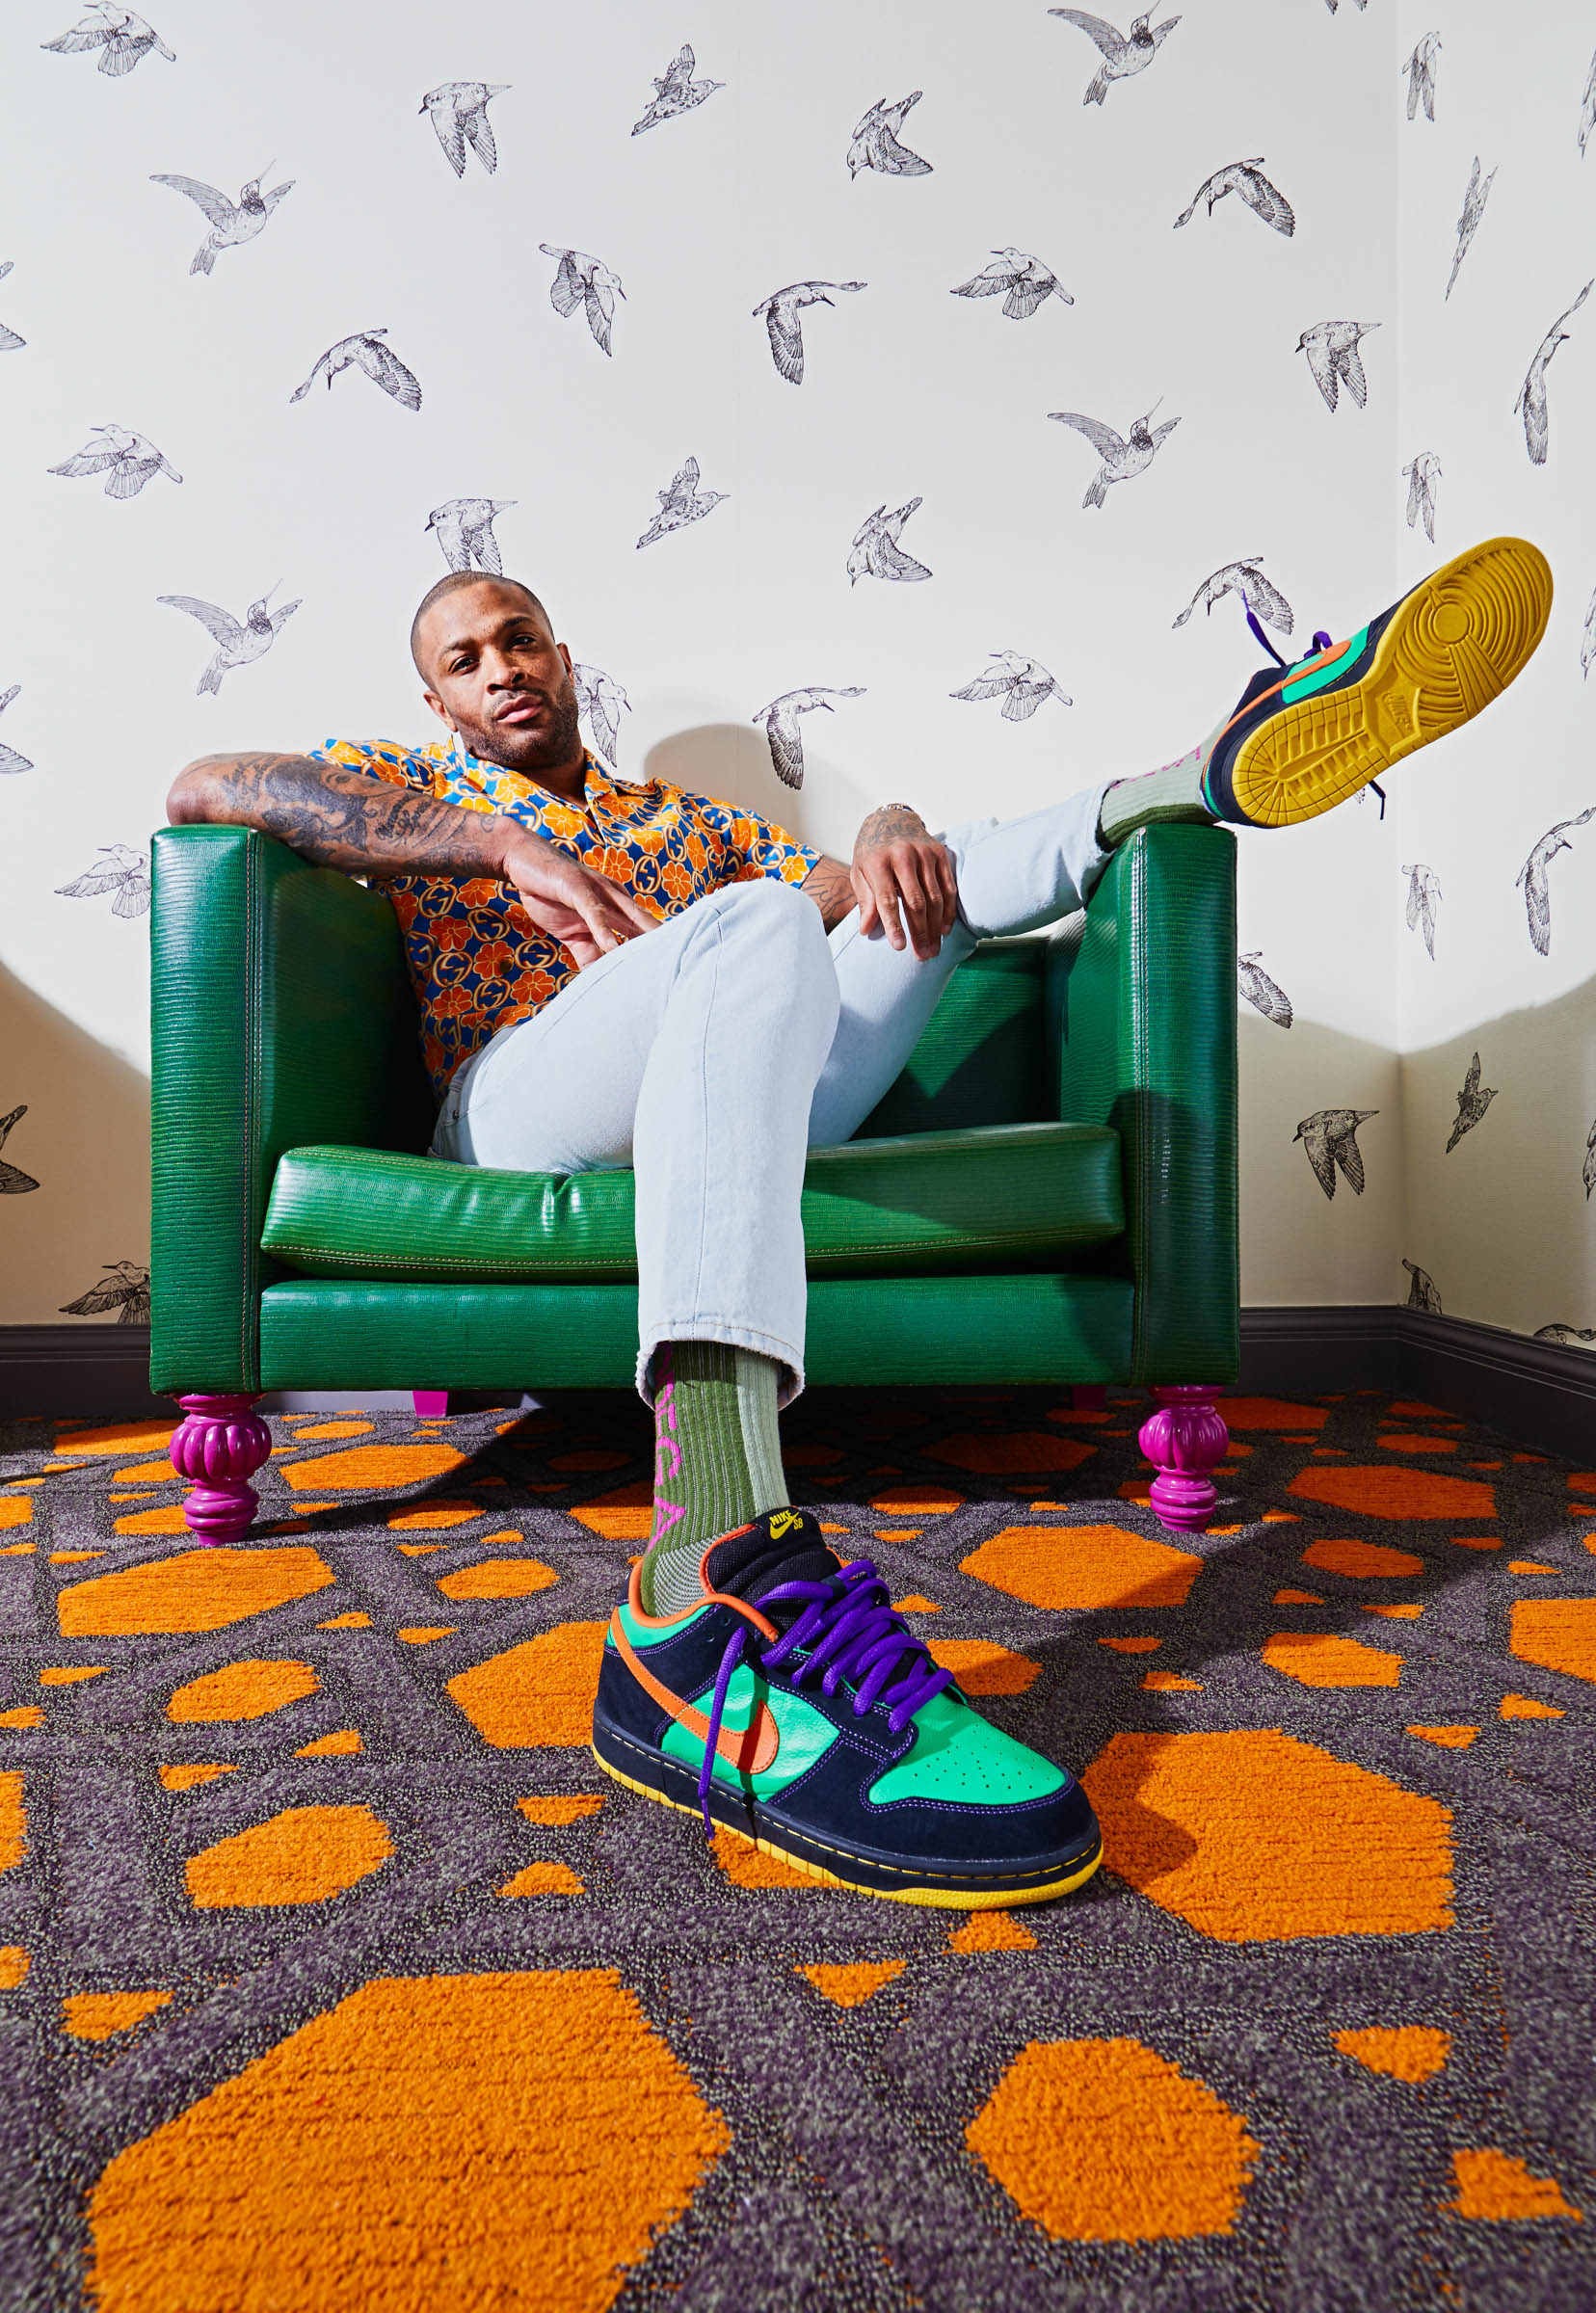 Portrait of P.J. Tucker sitting in a too-small chair. He is the NBA’s sneaker king, and a forward on the Houston Rockets. Photographed at the Monaco Hotel for Footwear News by Andy Batt.